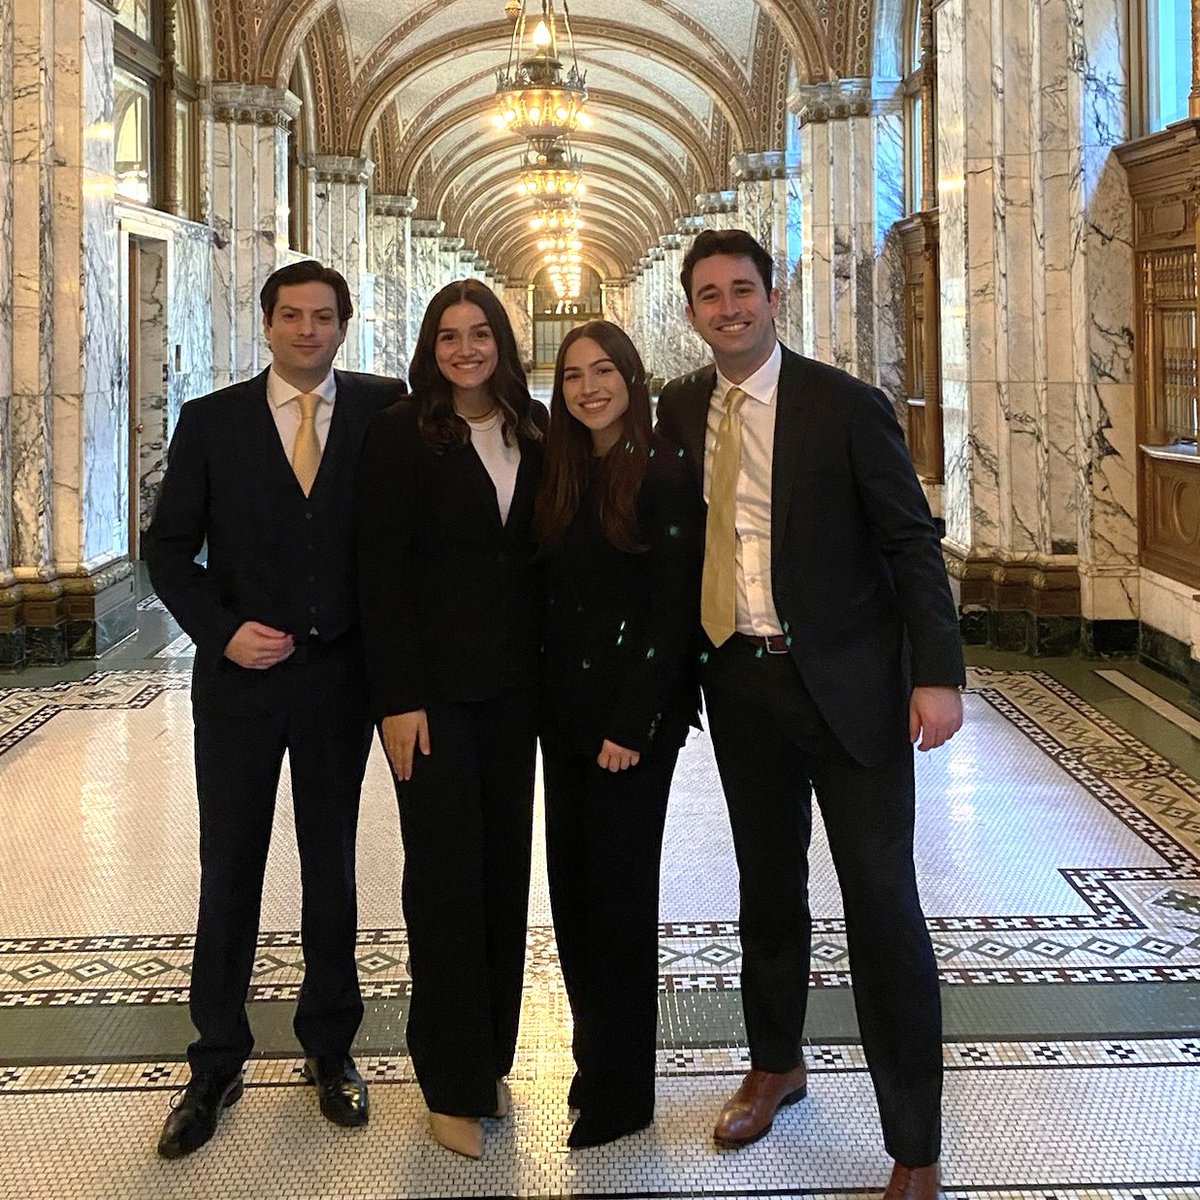 In February, #USFLaw students Brad Bergman ’25, Ben Libbey ‘24, Samara Salaheddine ‘25, & Lauren Silva ‘24 took 1st place at the Western Regional Division of the Saul Lefkowitz Moot Court Competition. Read more about our #mootcourt champions: usfca.edu/news/law-team-…